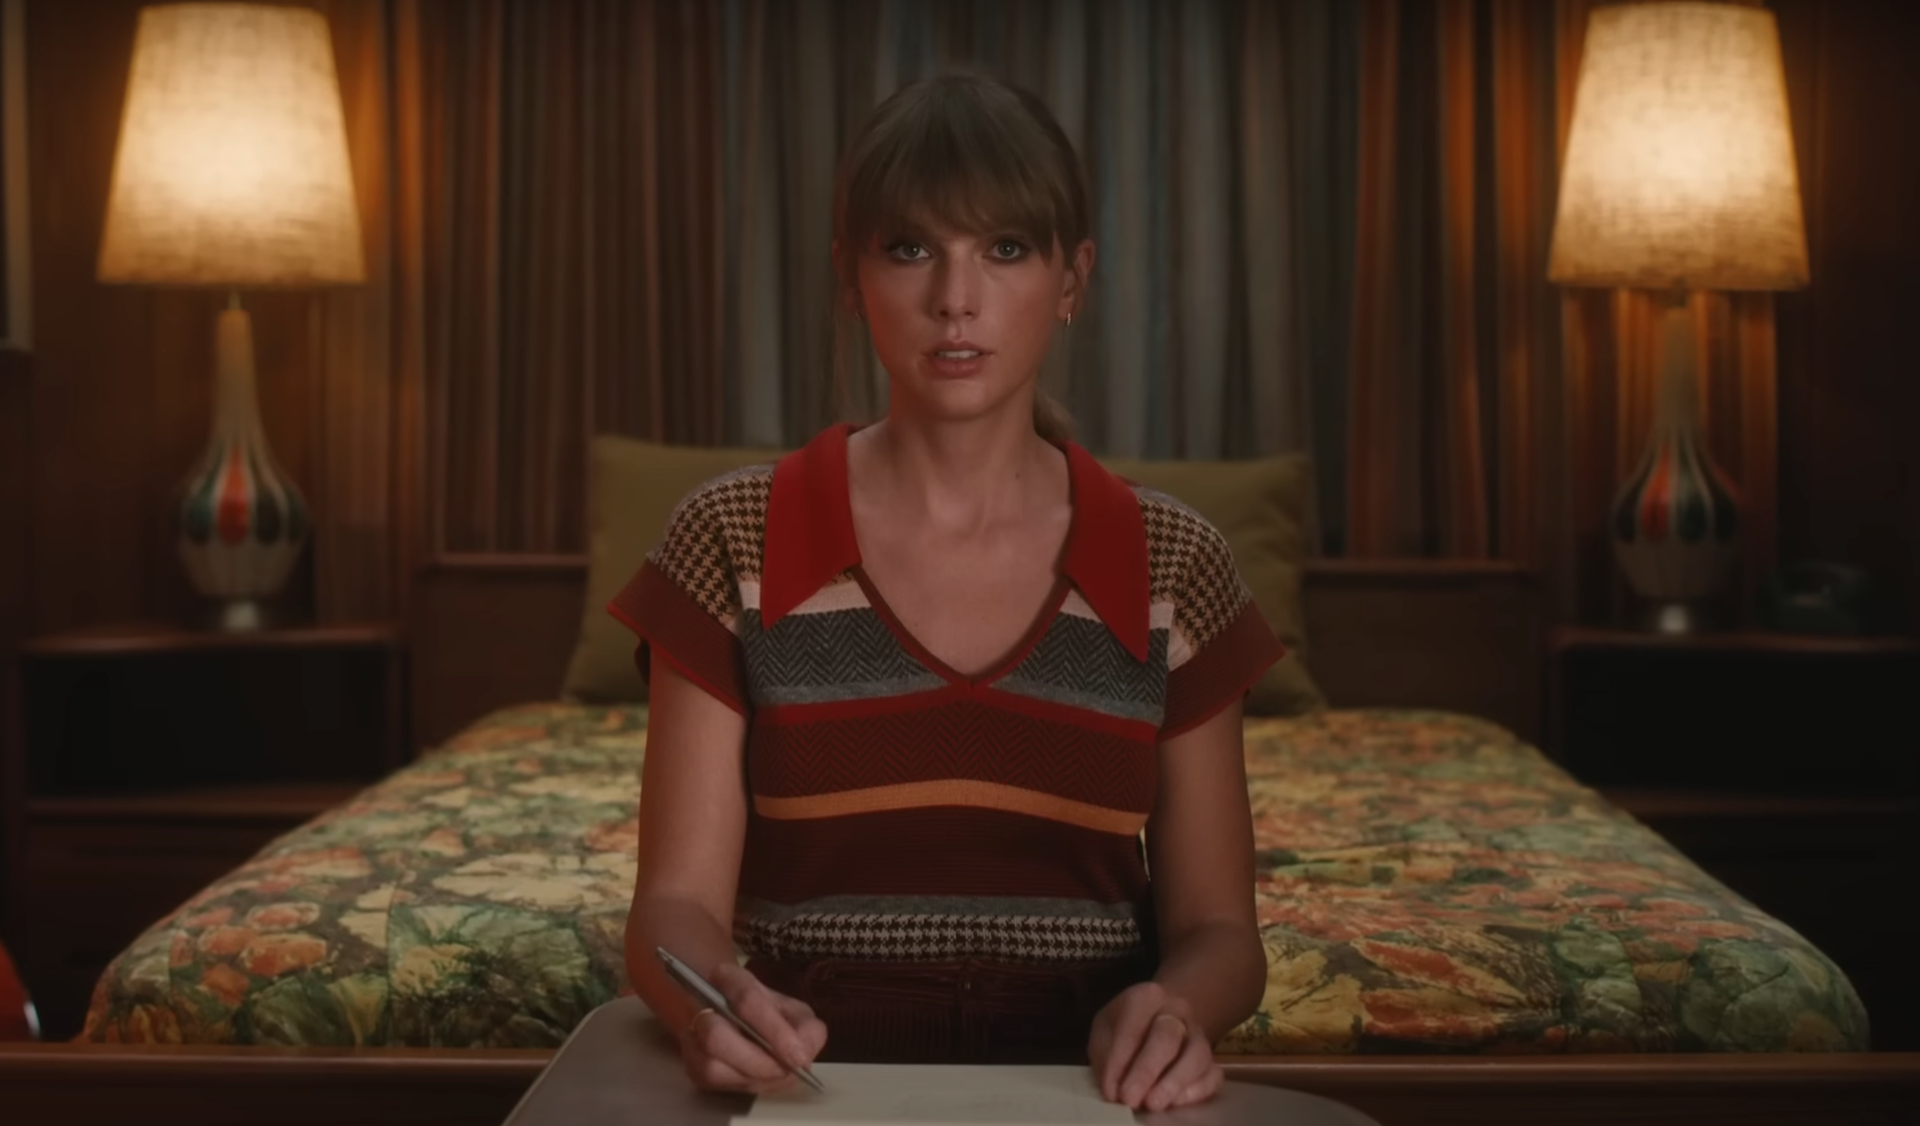 Taylor Swift released a new music video for her song 